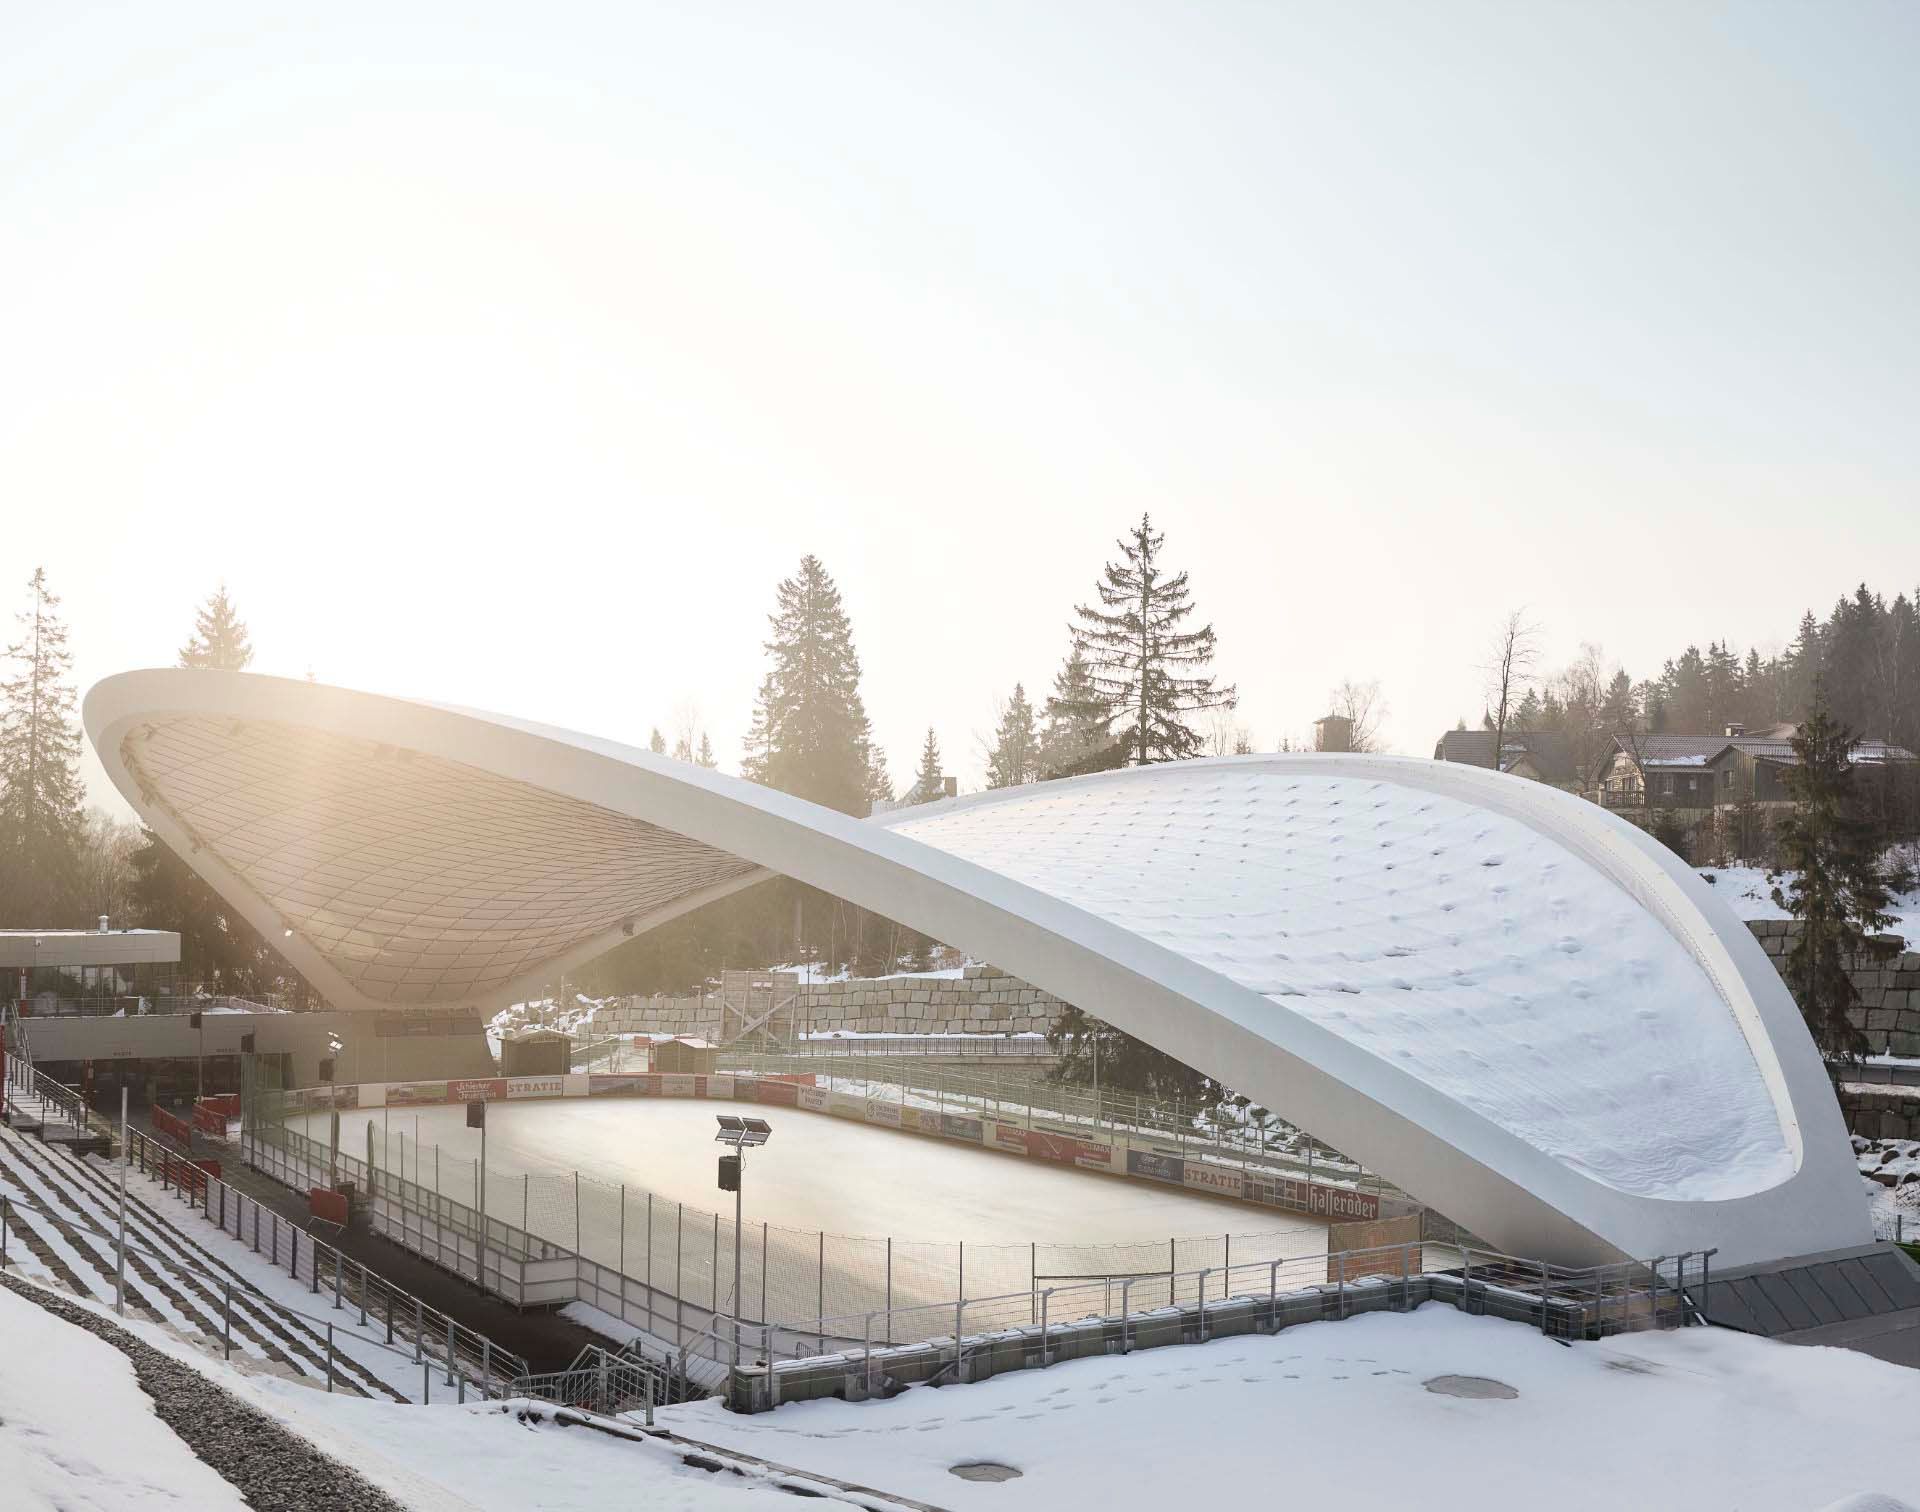 With its proposal for a unique roof construction, GRAFT won a 2013, Europe-wide architectural competition to renovate the city’s ice rink. 